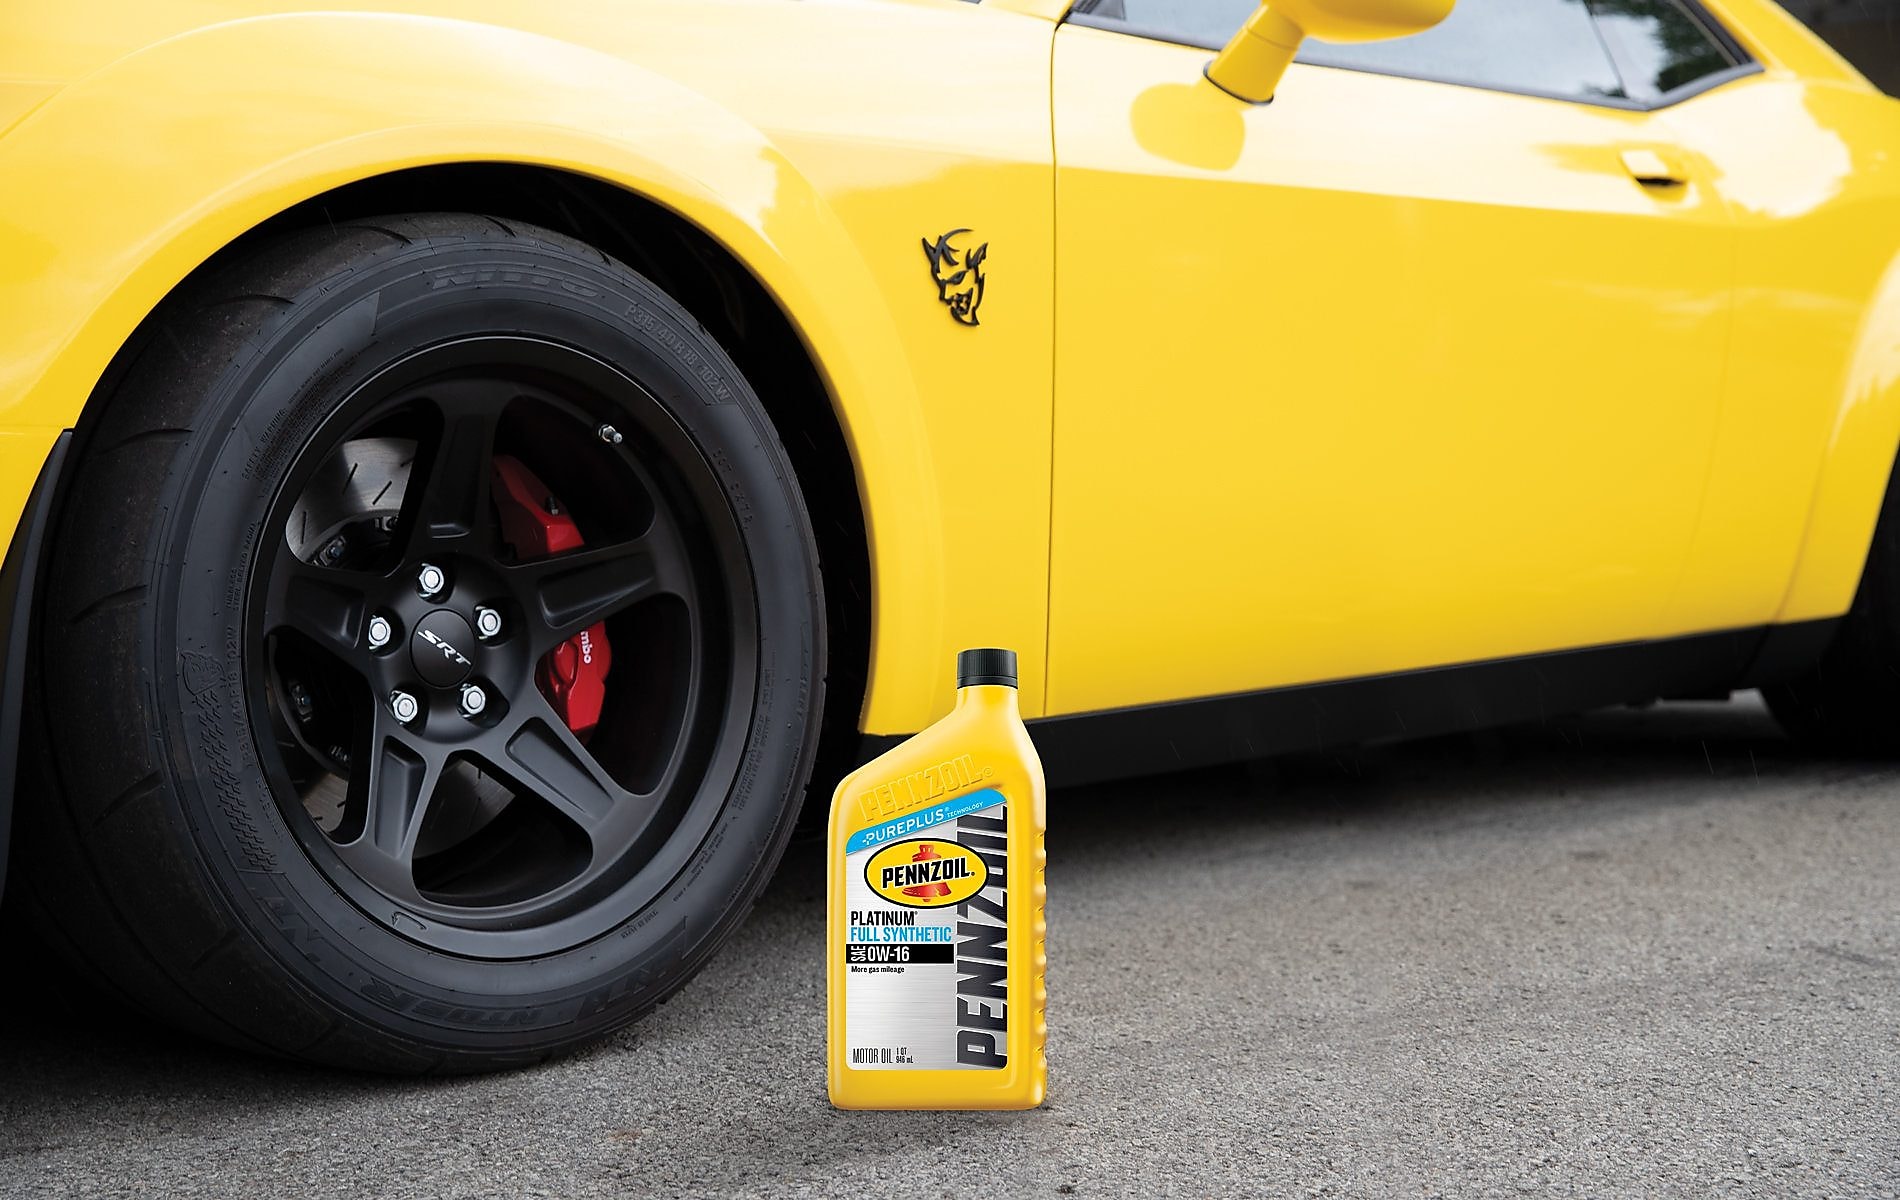 Who Needs A Sae 0w 16 Grade Motor Oil With Lspi Protection